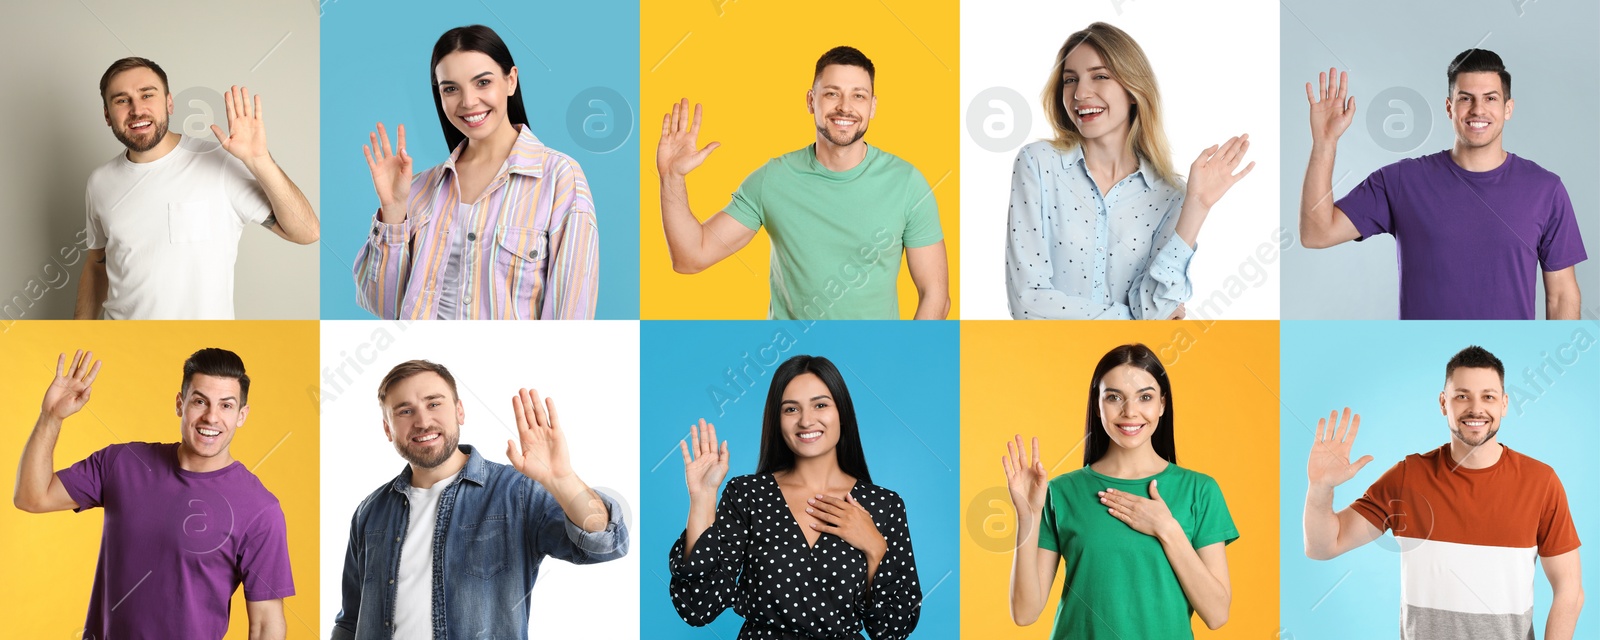 Image of Collage with photos of cheerful people showing hello gesture on different color backgrounds. Banner design